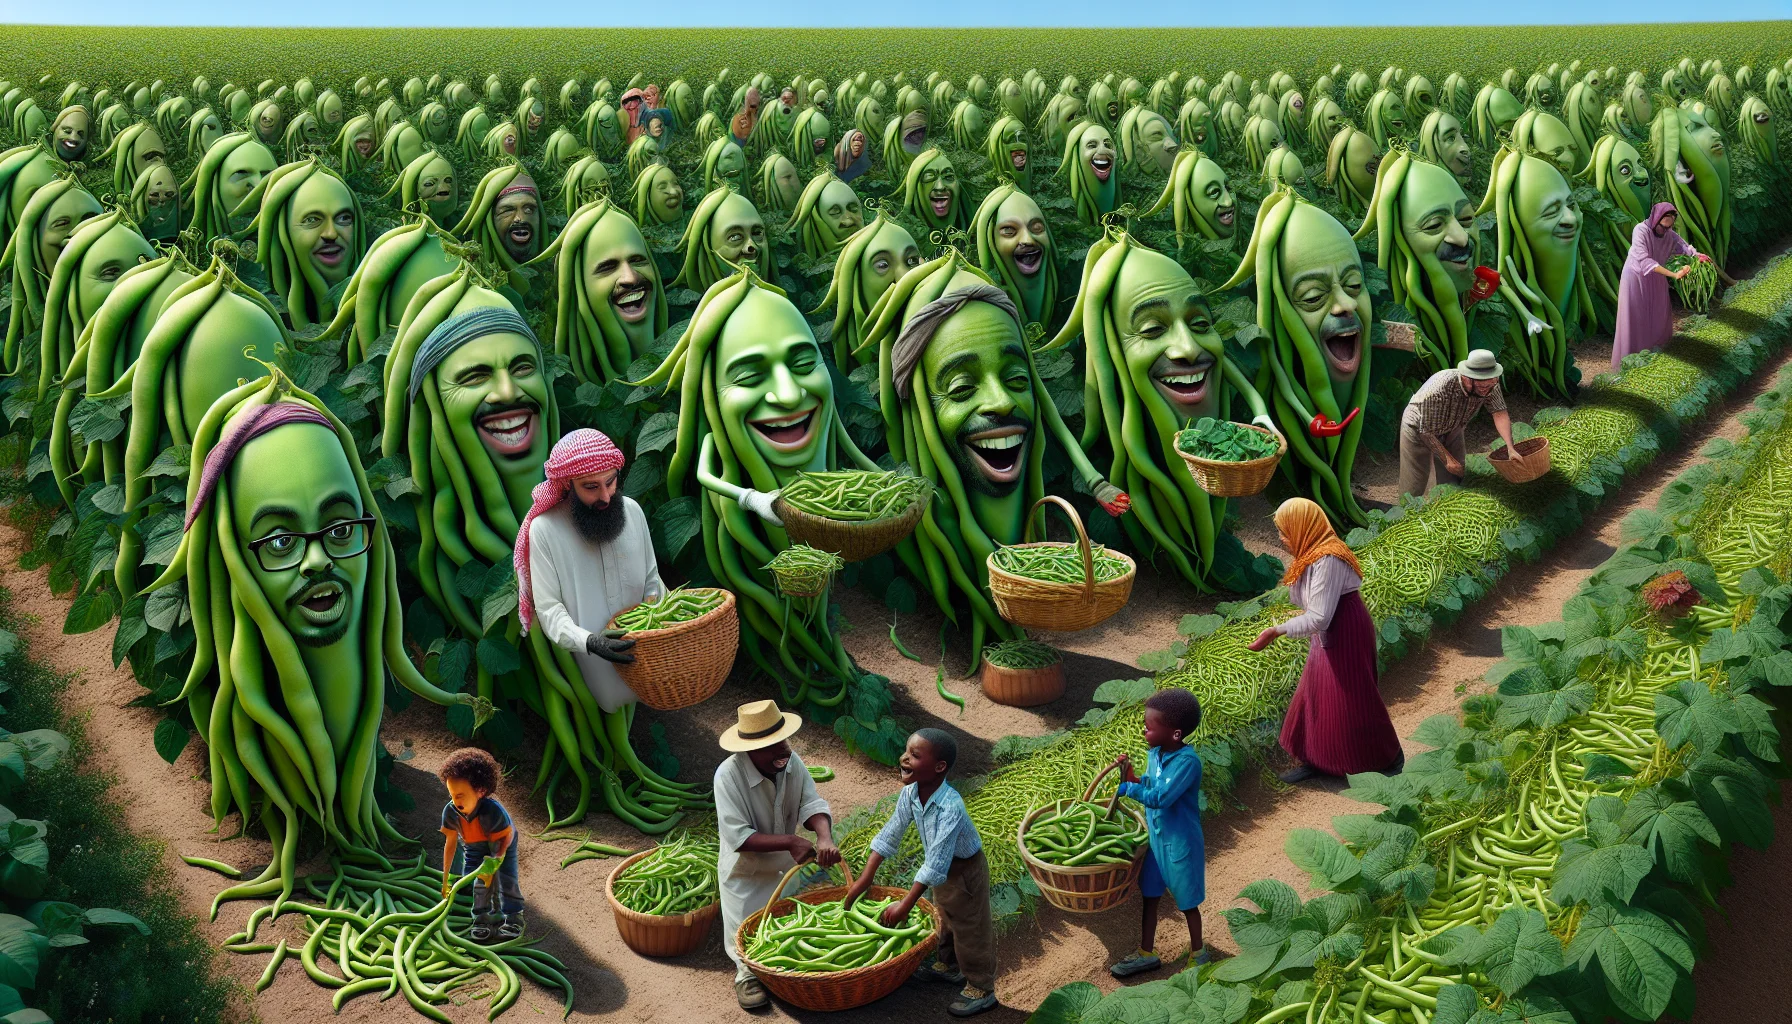 Generate a humorous and realistic image capturing the concept of how many green beans each plant can produce. Show a garden full of green bean plants in full bloom, each drooping under the weight of abundant, ripe, vibrant green beans. Include a few anthropomorphic green bean plants with exaggerated expressions of surprise or pride at their bountiful harvest. Intermingle these elements with scenes of people from various descents and genders—Middle-Eastern woman, Hispanic man, Black child—joyfully engaged in gardening, tending the plants, overflowing baskets of beans in hand, and being amazed by the productivity of the plants. Let this image inspire viewers to take up gardening.